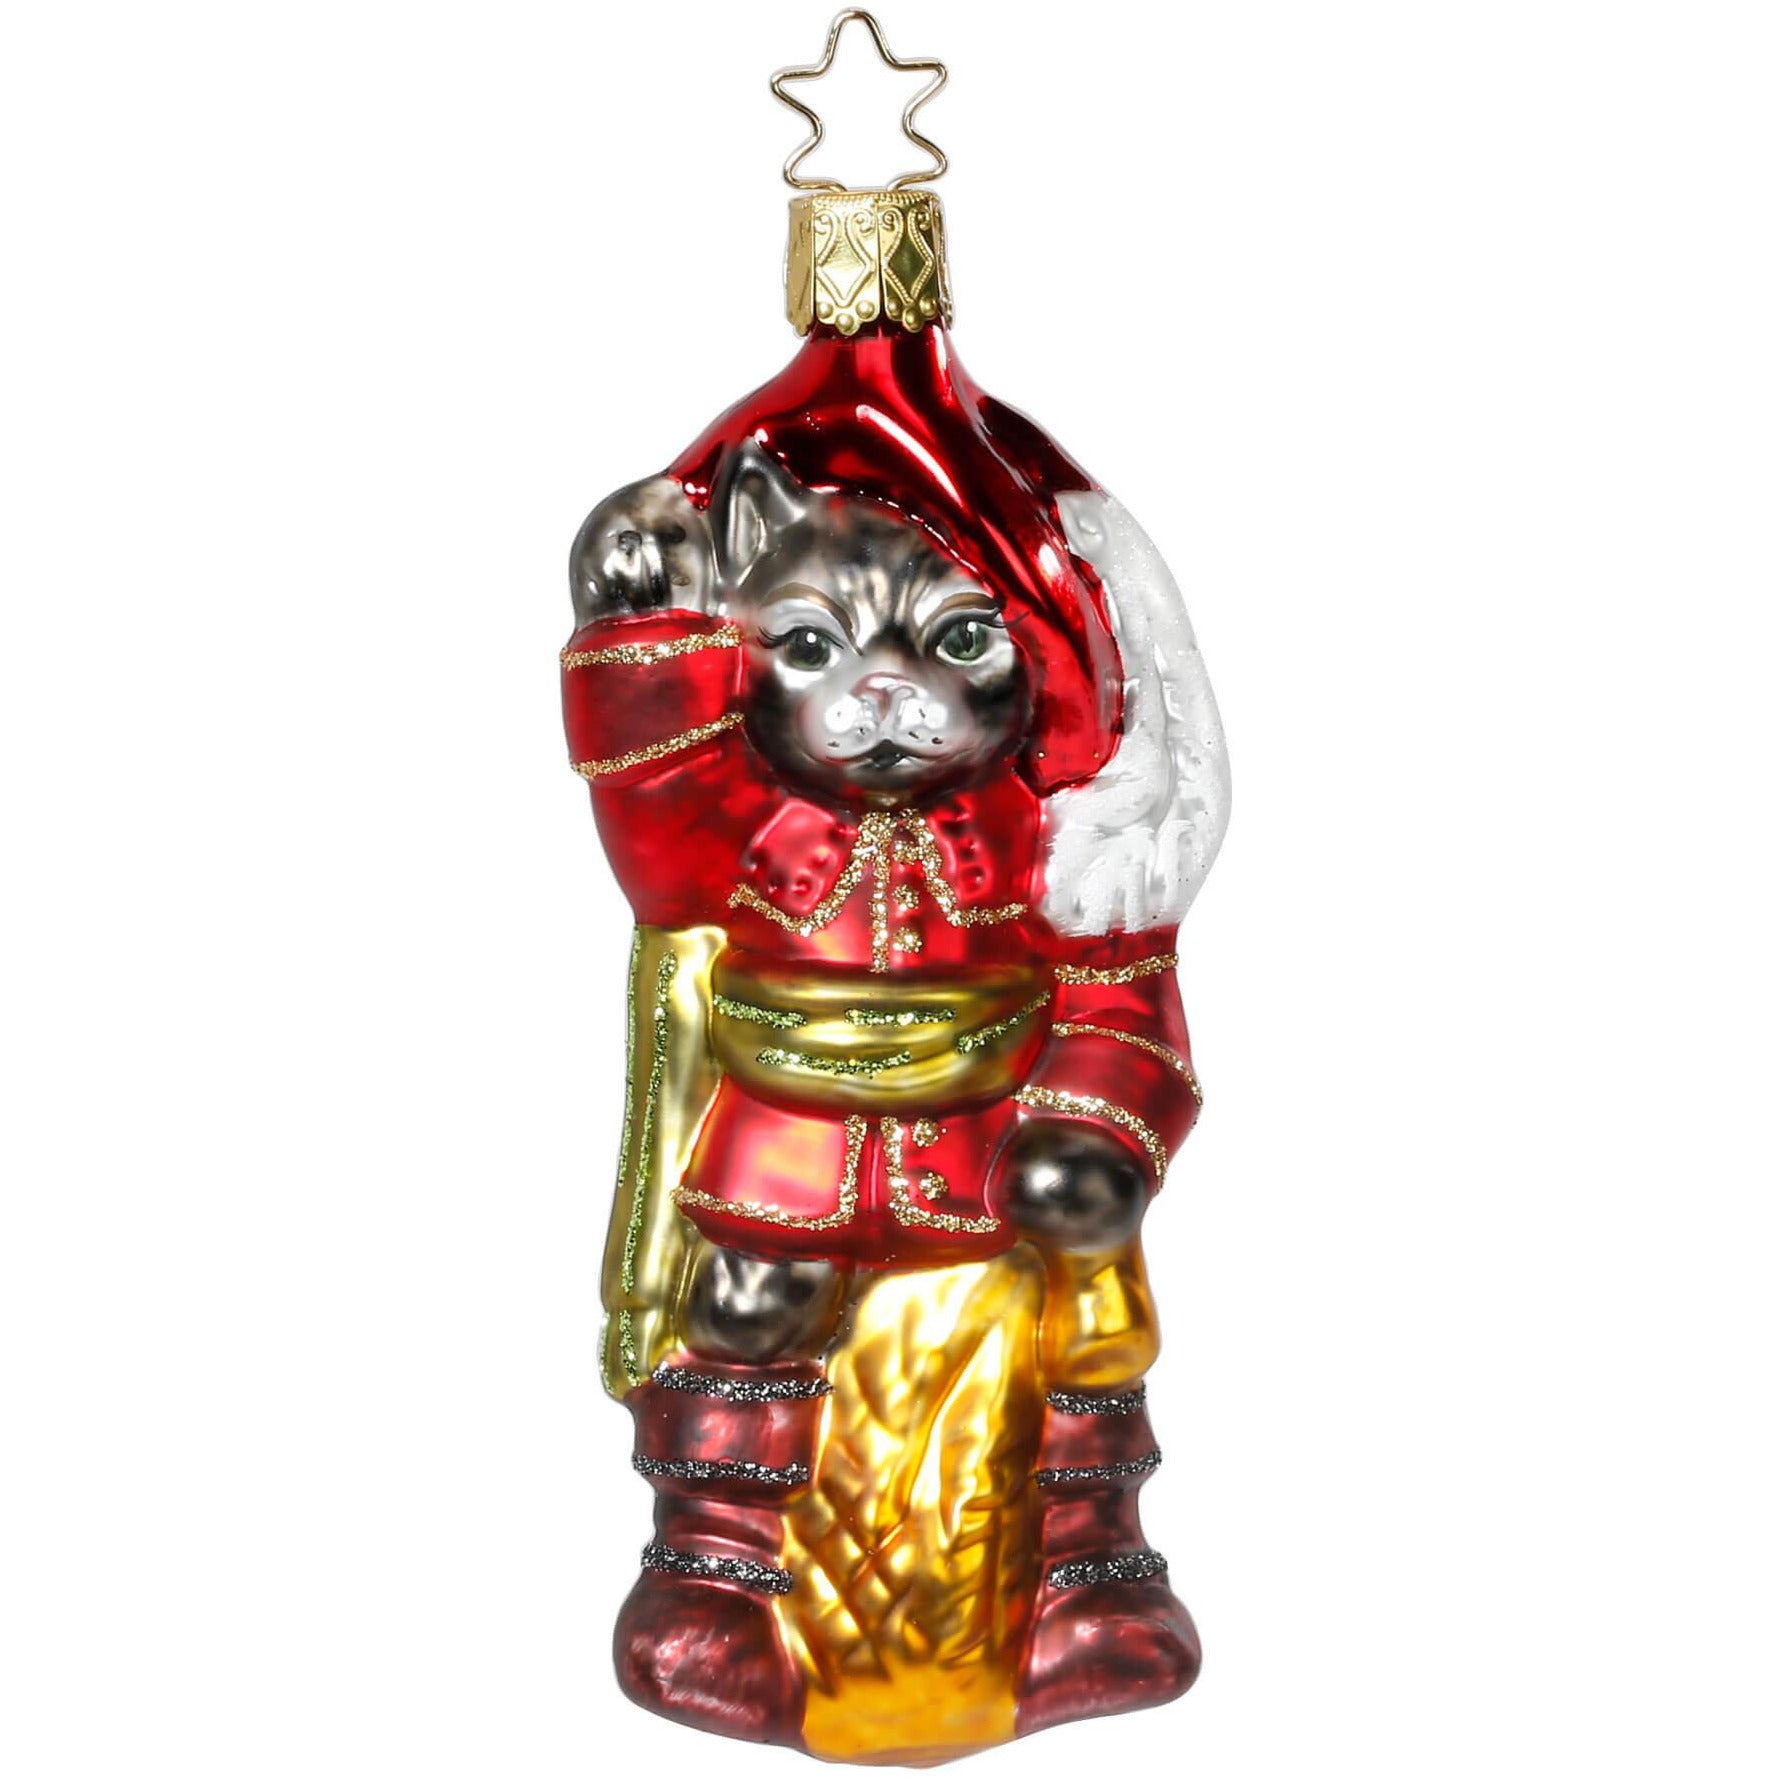 Puss'n' Boots Ornament - Zinnias Gift Boutique